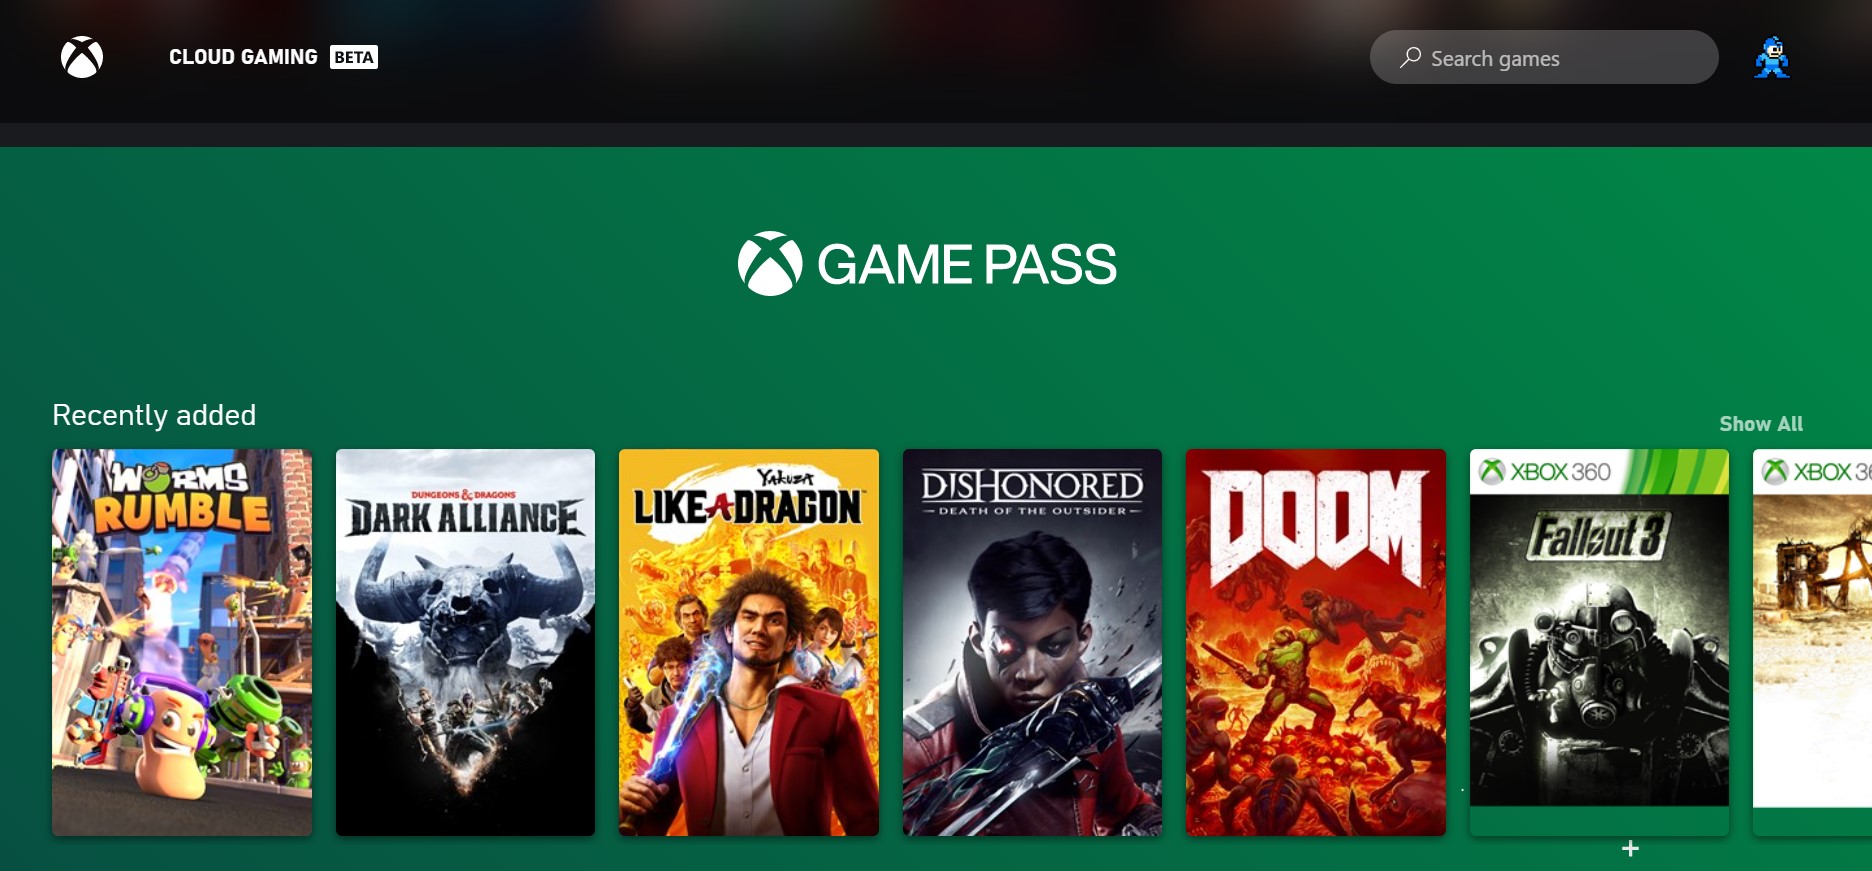 Microsoft upgrades Xbox Cloud Gaming, expands platforms to PC and iOS devices